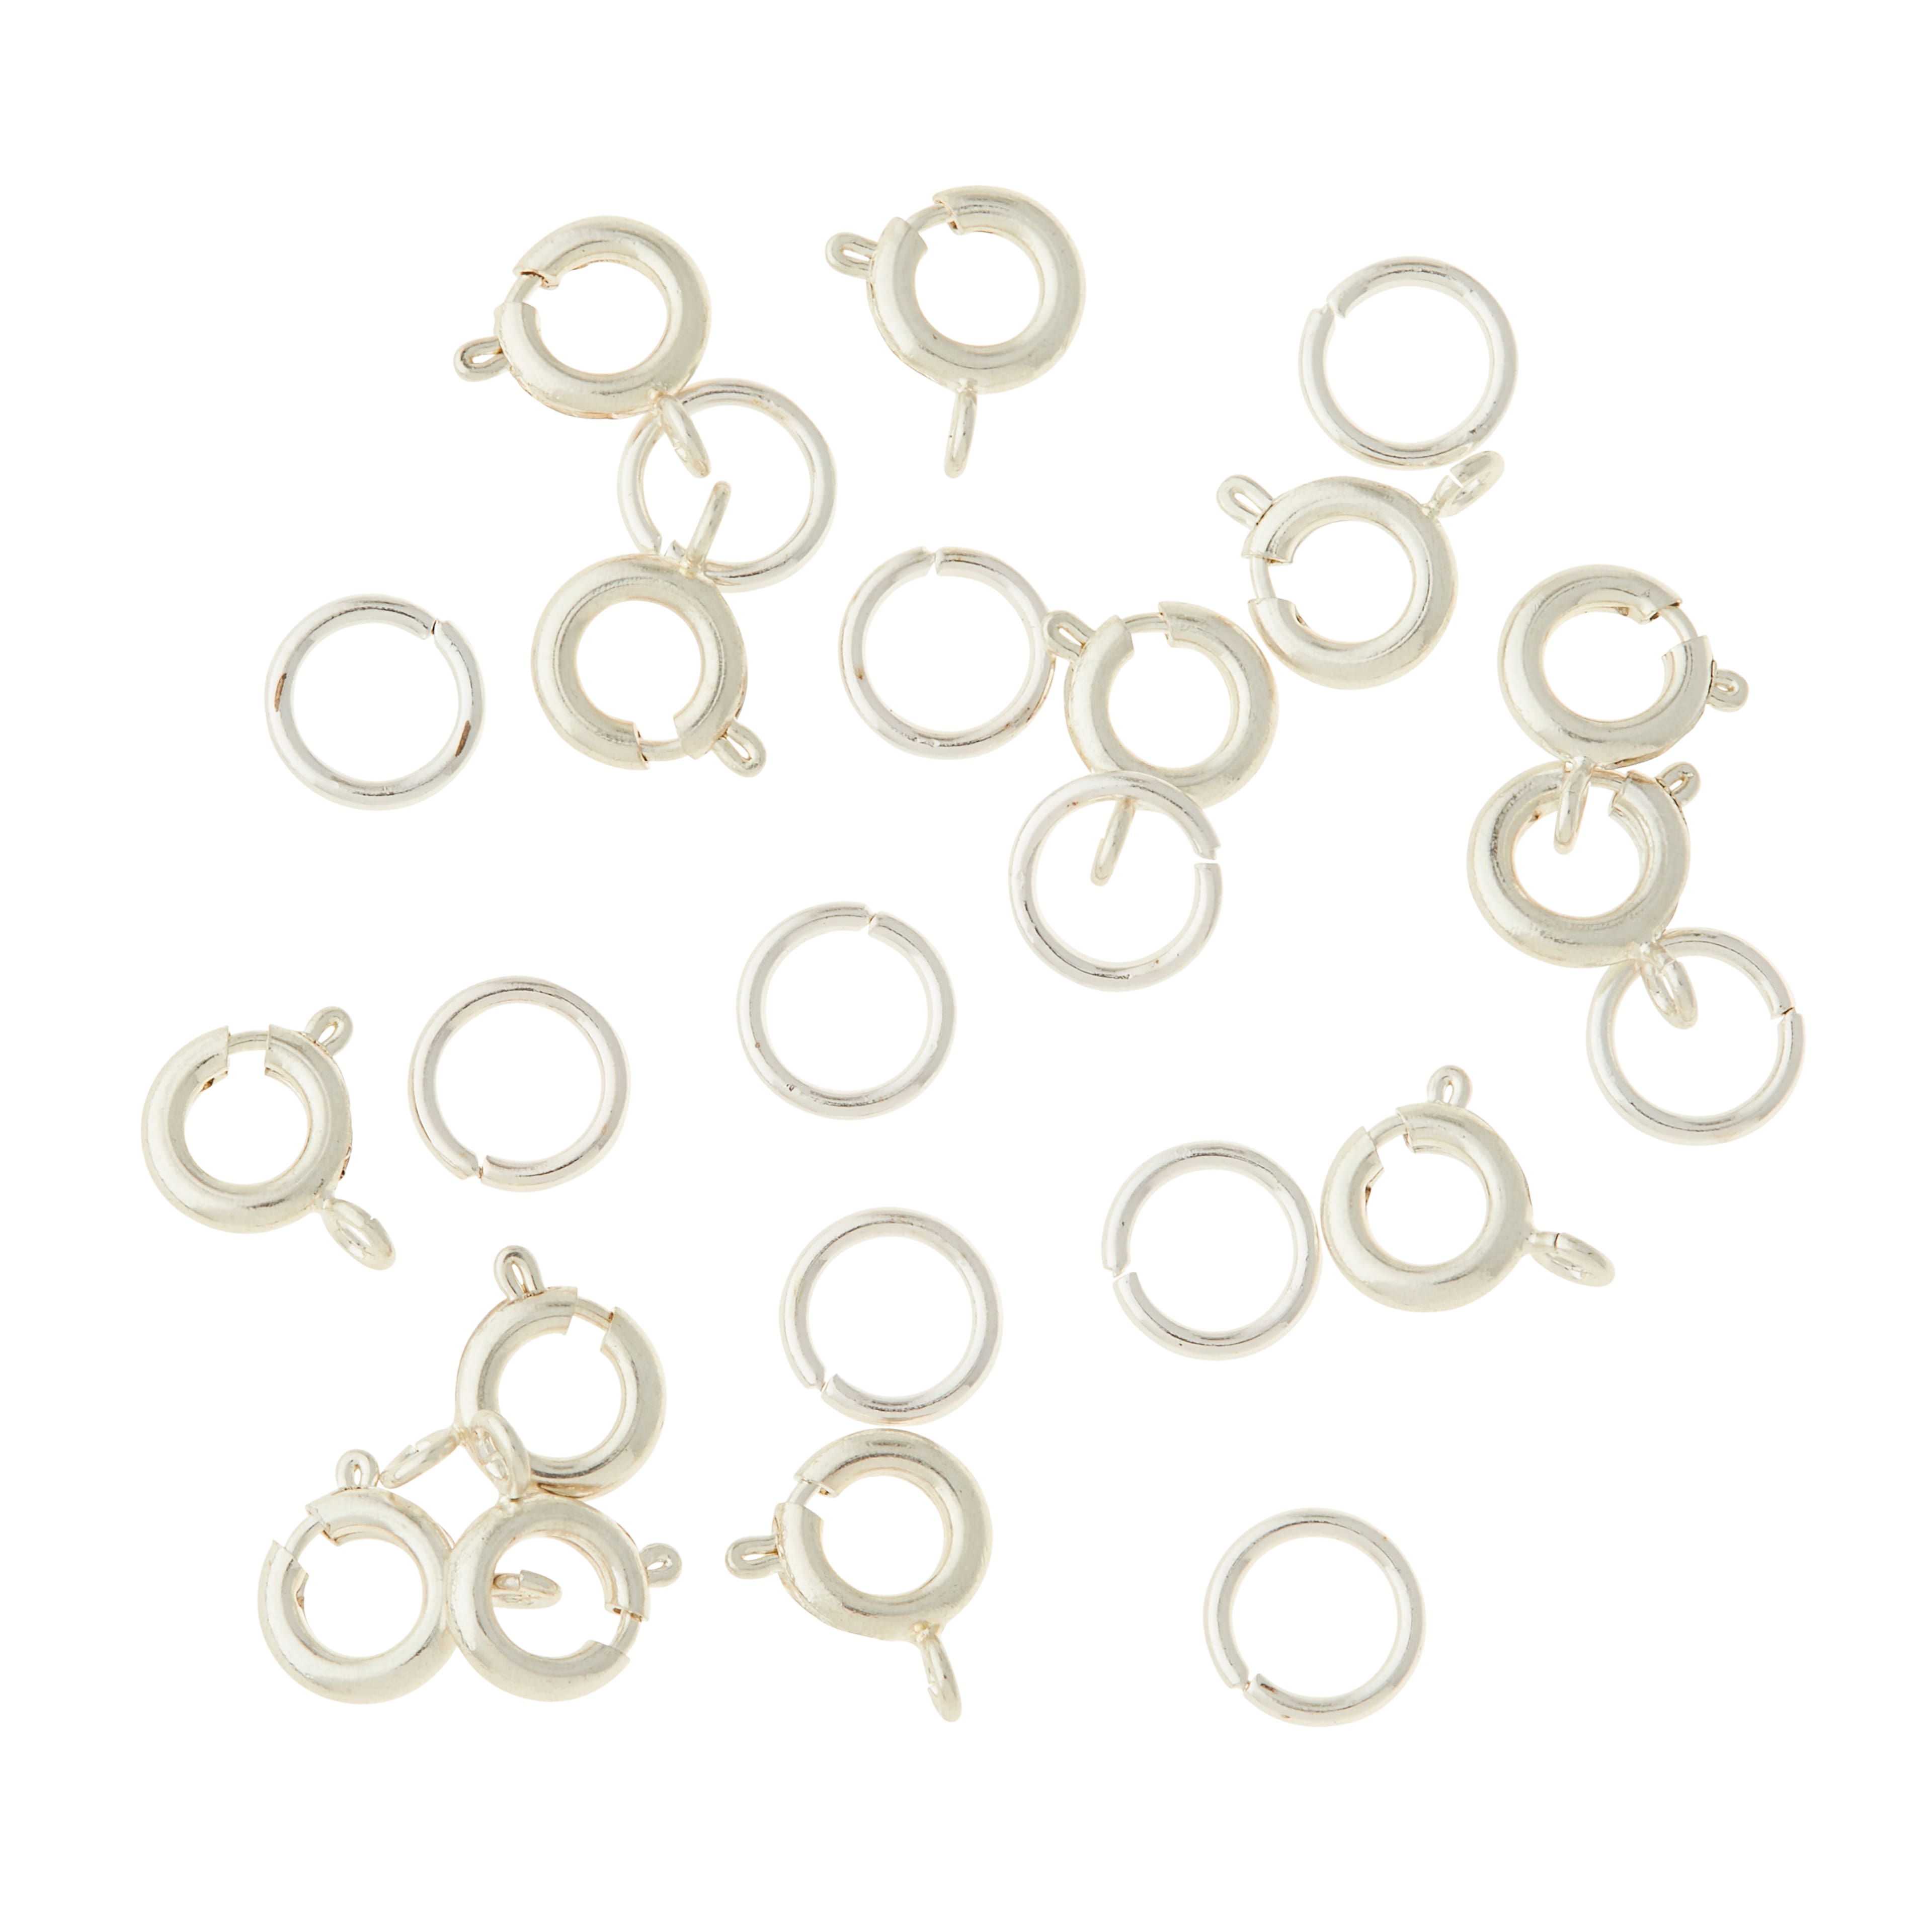 7mm Spring Ring Clasps, 36ct. by Bead Landing™